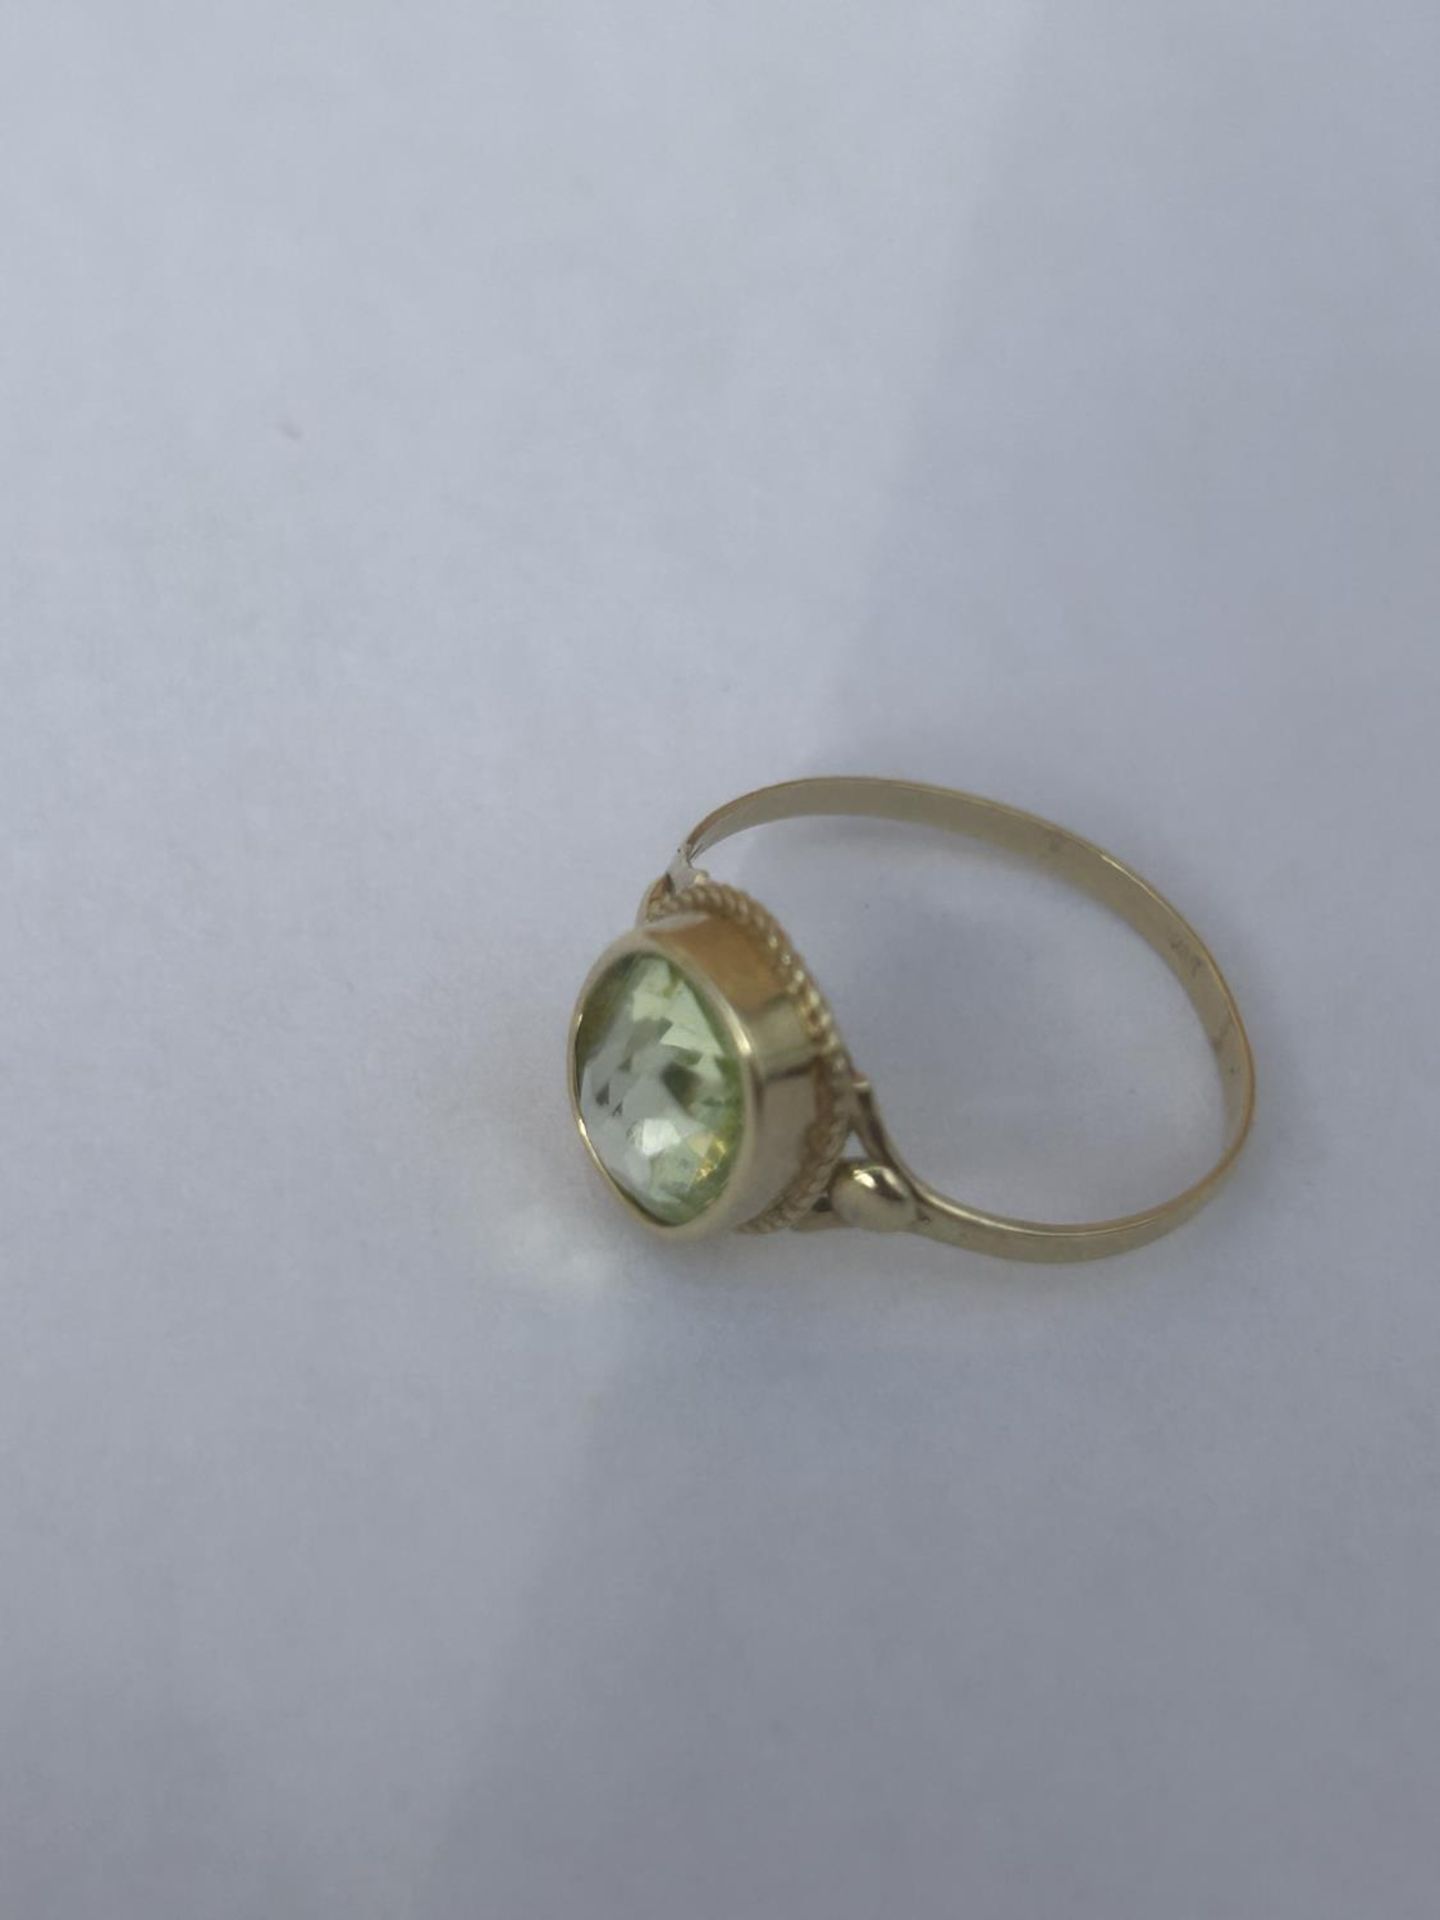 A 14CT GOLD RING WITH A PERIDOT GEMSTONE, SIZE N, WEIGHT 1.65 G - Image 3 of 3